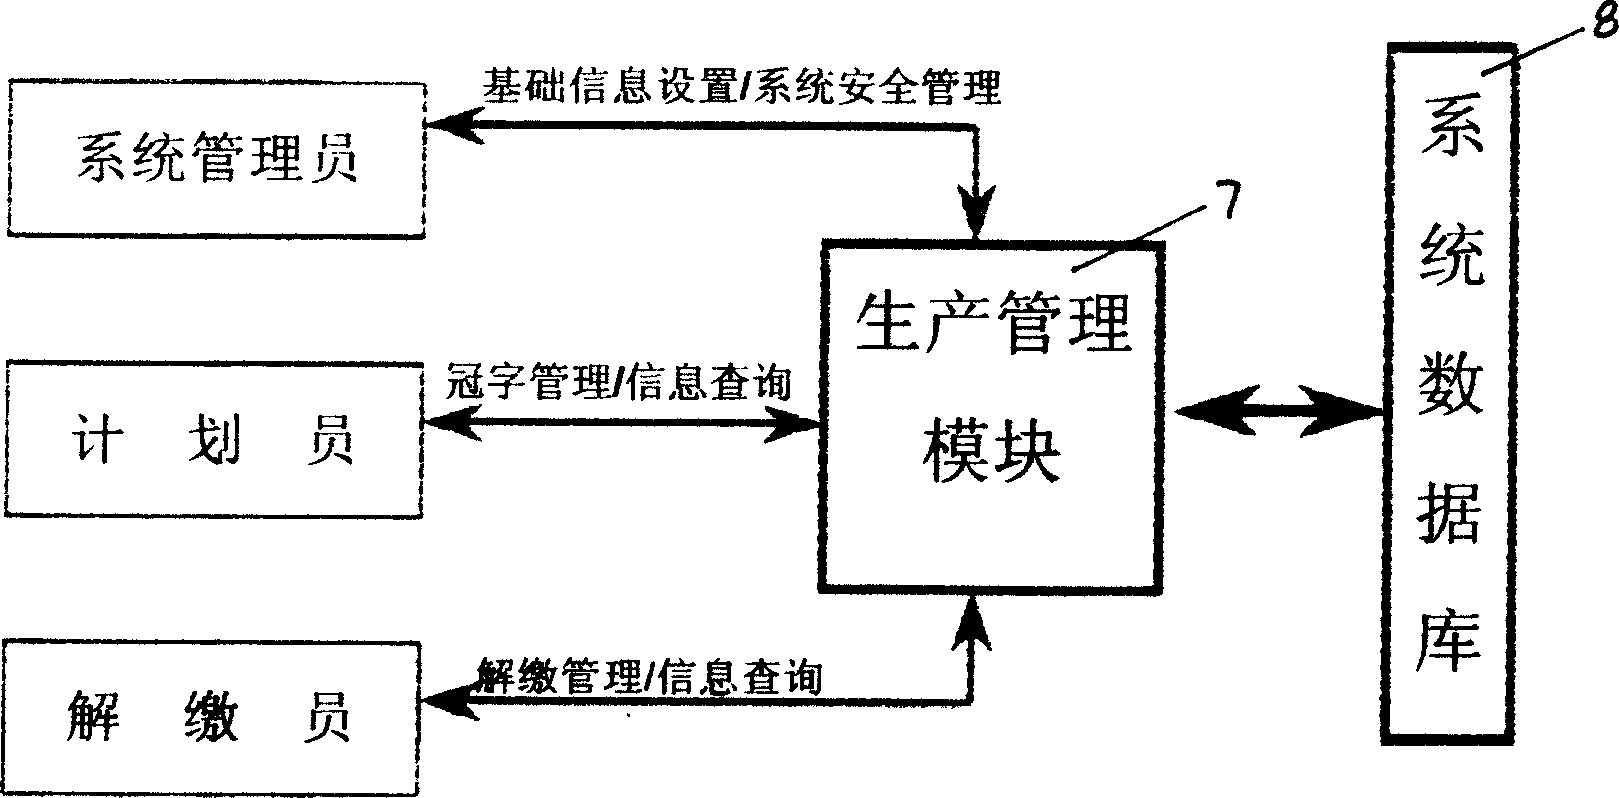 Currency packaging box external mark, scanning hand terminal, currency information two dimensional bar code management system